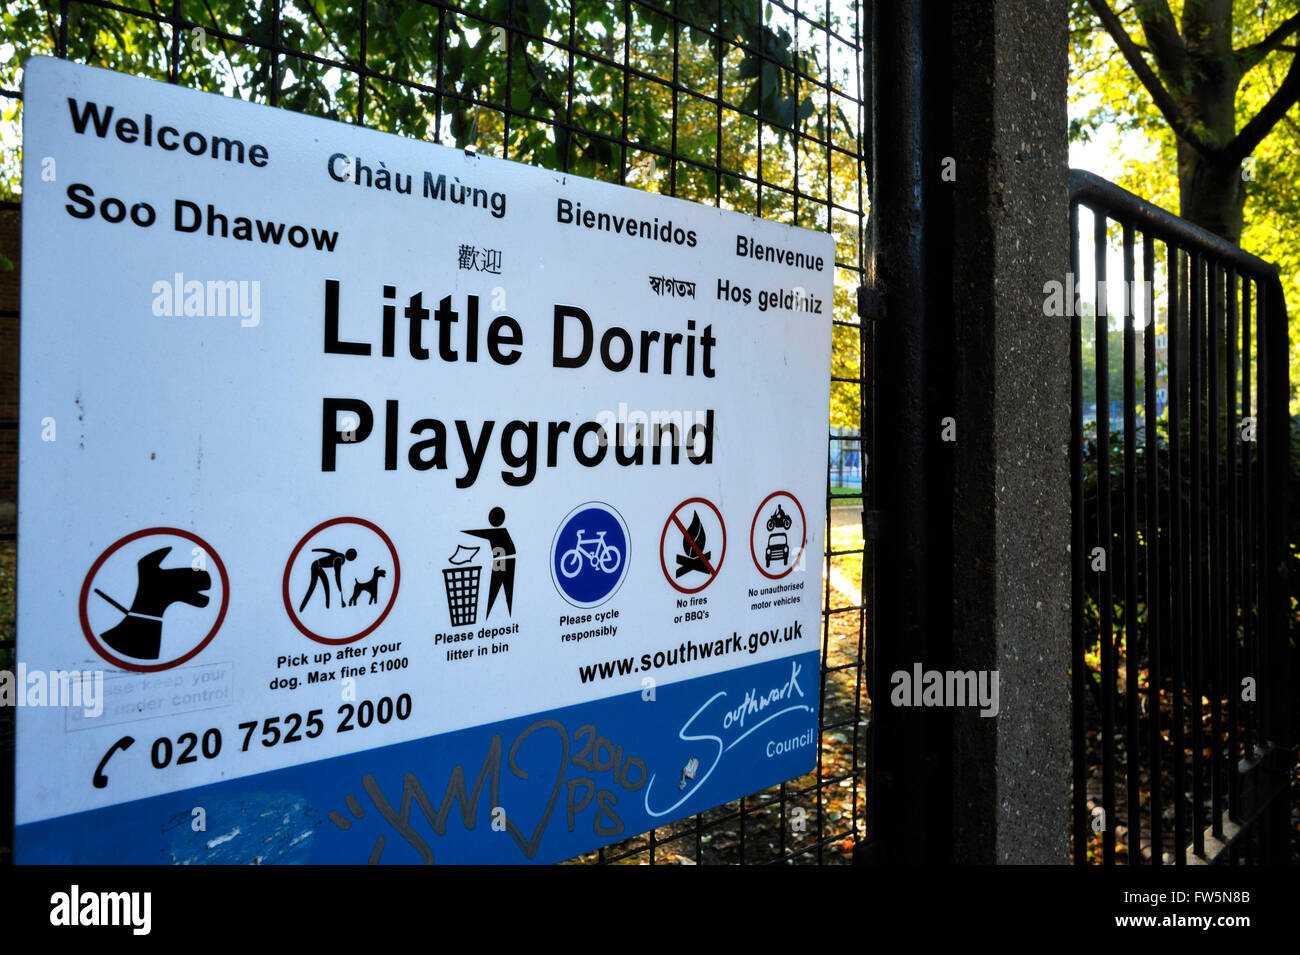 playground sign, Little Dorrit Playground, Little Dorrit Court, by Borough High St., Southwark, London. Named after the book by English novelist Charles Dickens, who set scenes of his novel Little Dorrit in this area. Amy Dorrit's father, William, was imprisoned nearby at the Marshalsea prison, and St. George's church where Amy Dorrit was christened and married is adjacent to the Marshalsea. Stock Photo